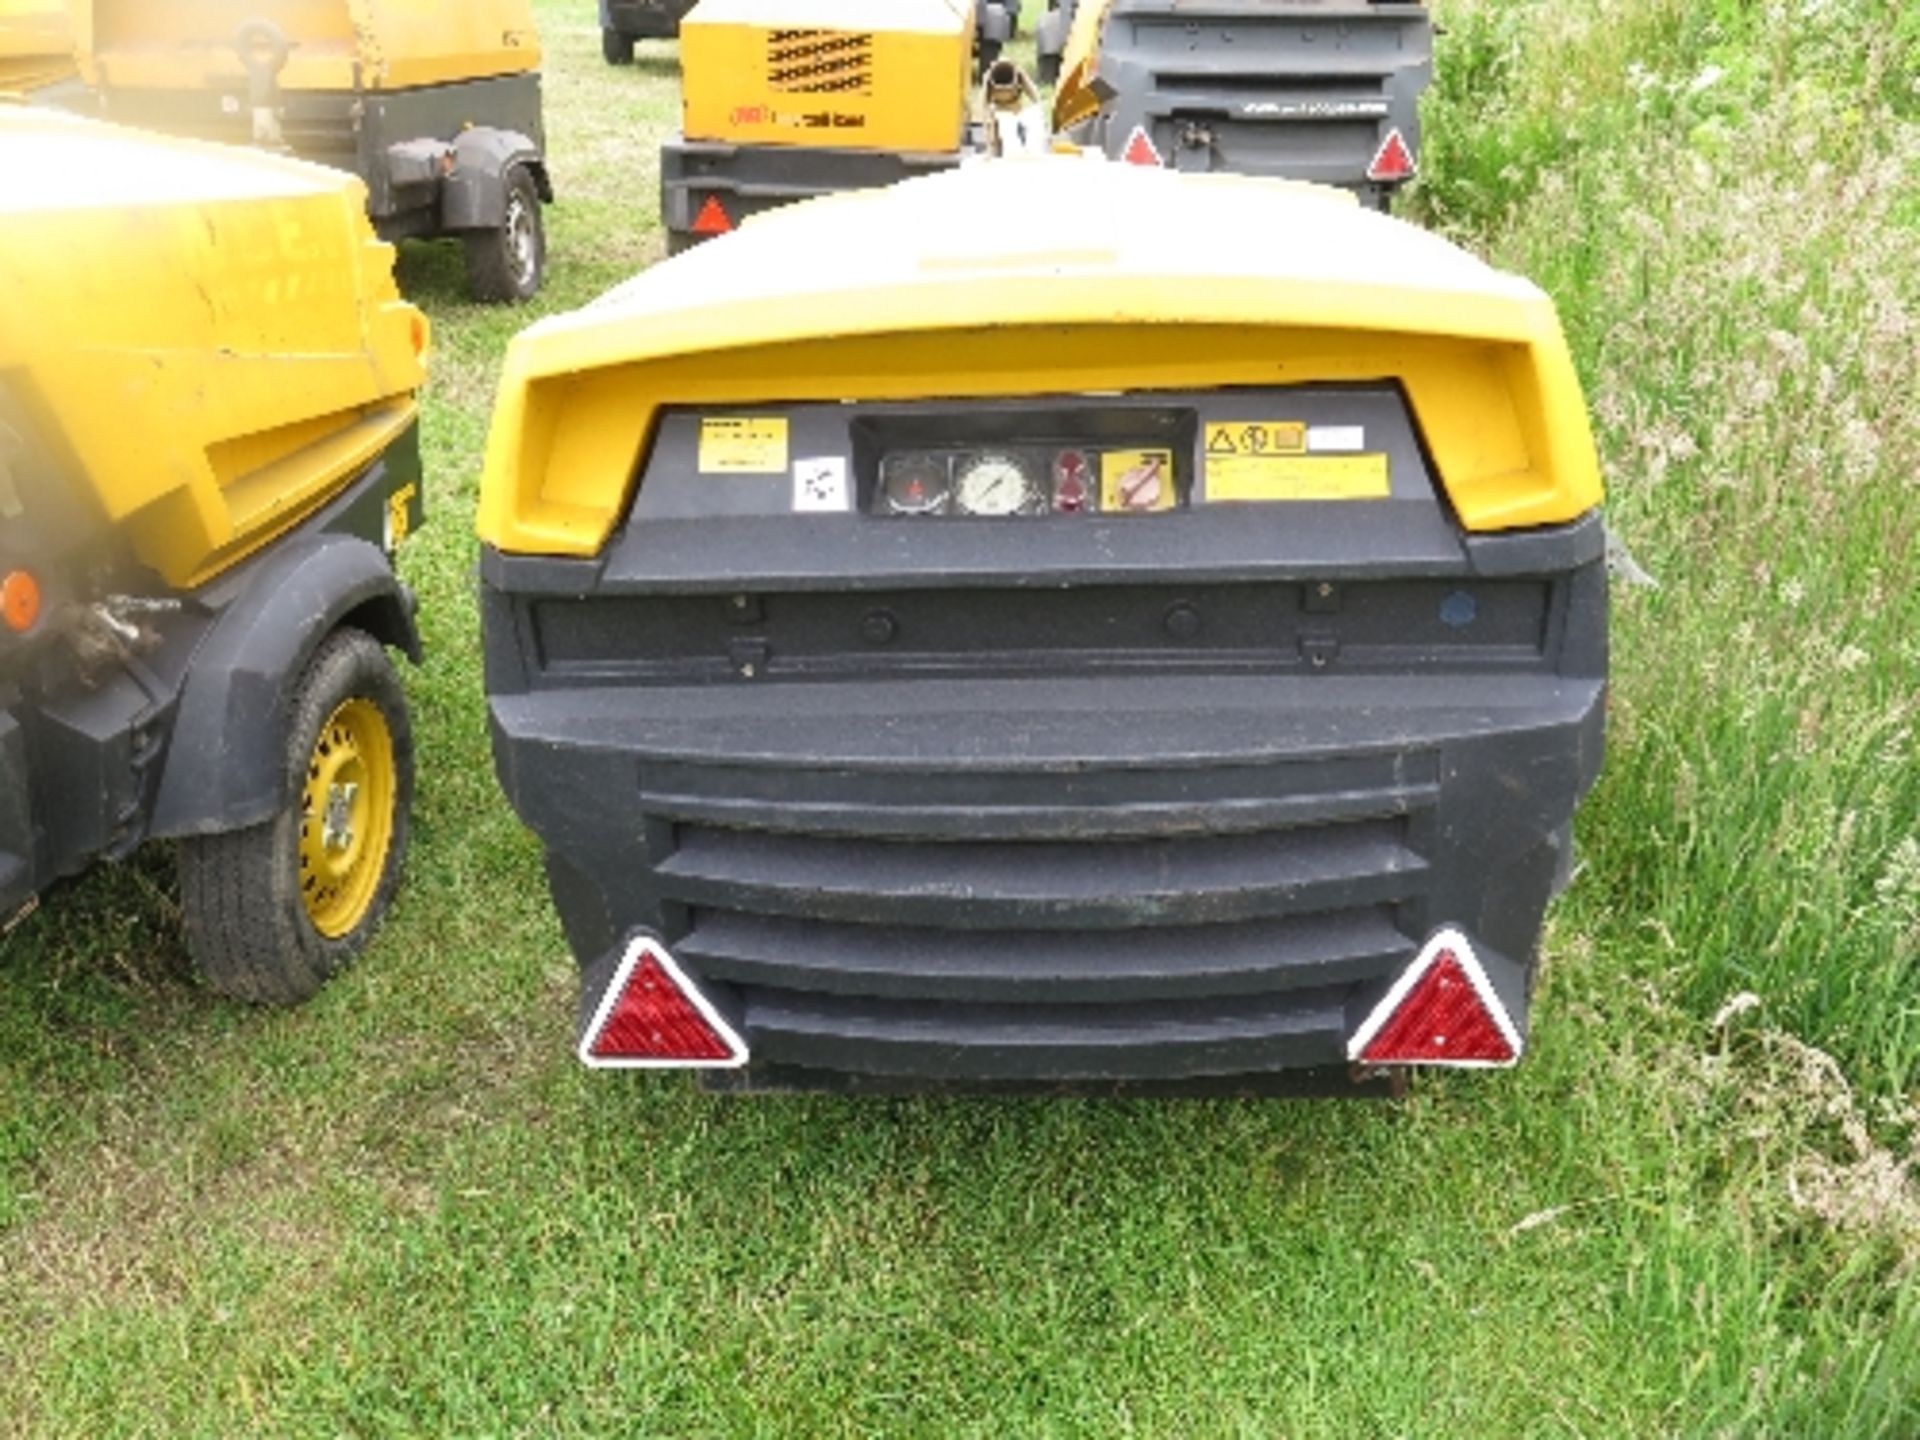 Atlas Copco XAS47 compressor 2007 154151
455 HOURS - KUBOTA - RUNS AND MAKES AIR
ALL LOTS are SOLD - Image 2 of 5